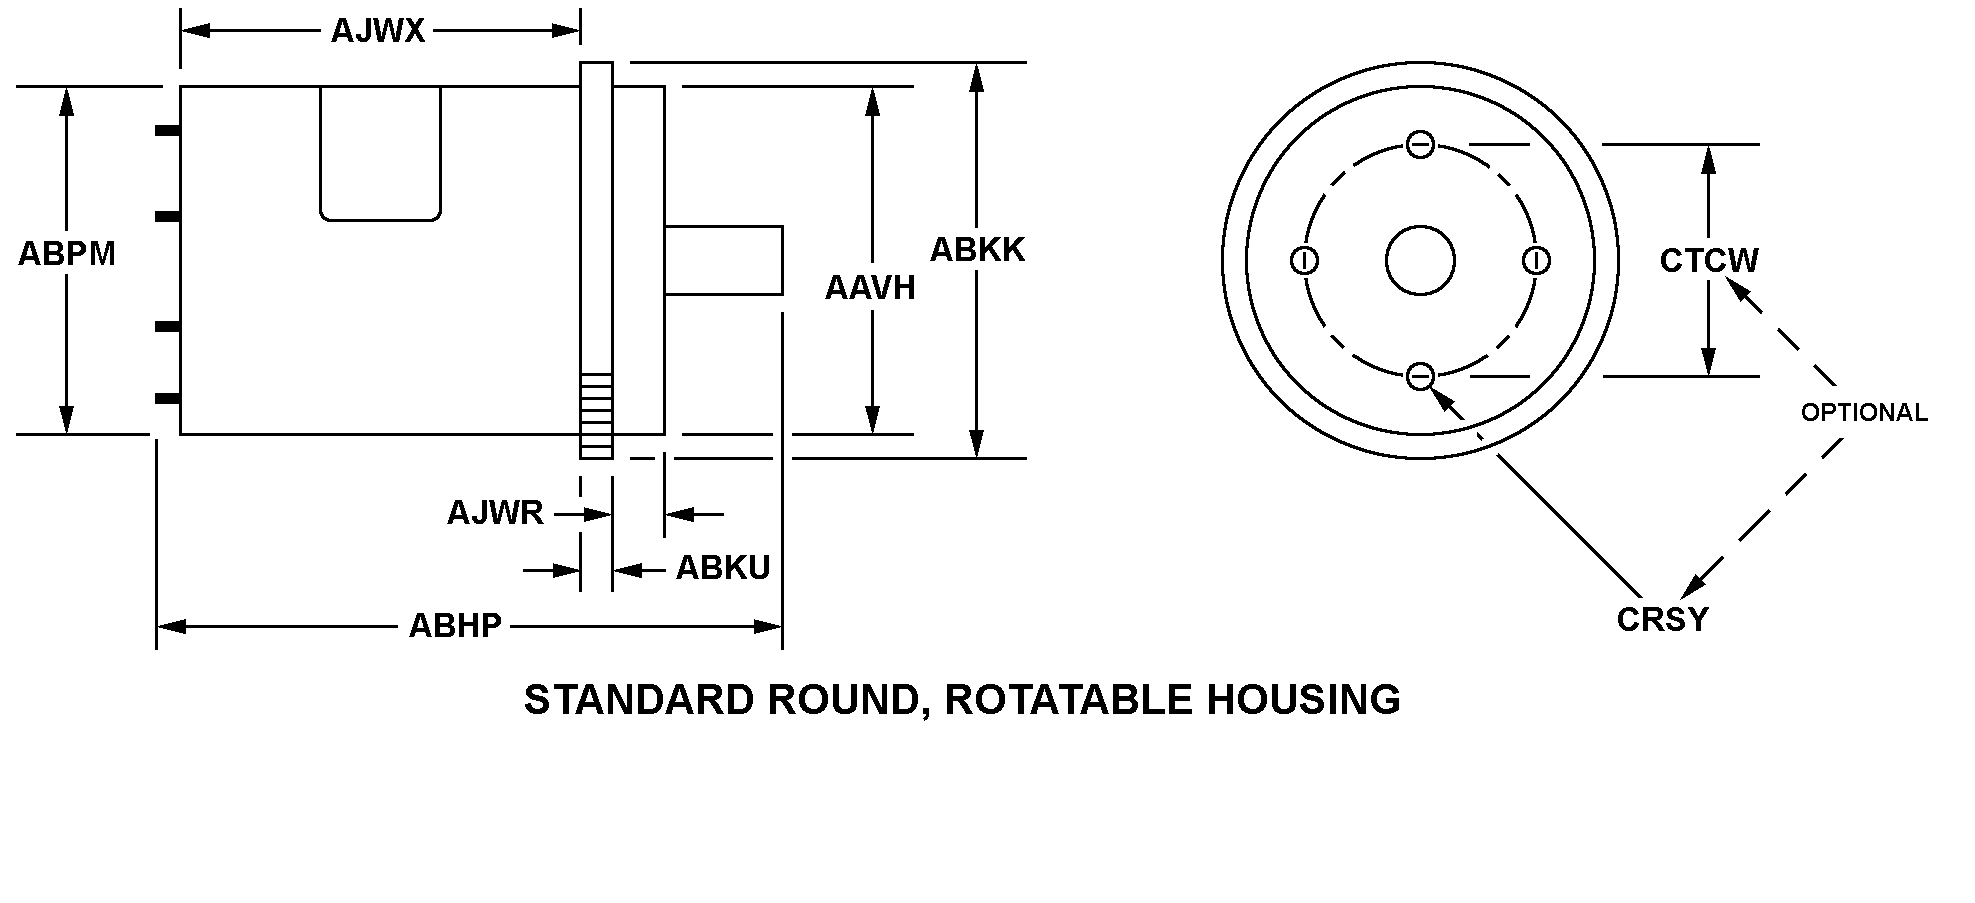 STANDARD ROUND, ROTATABLE HOUSING style nsn 5990-01-190-7328